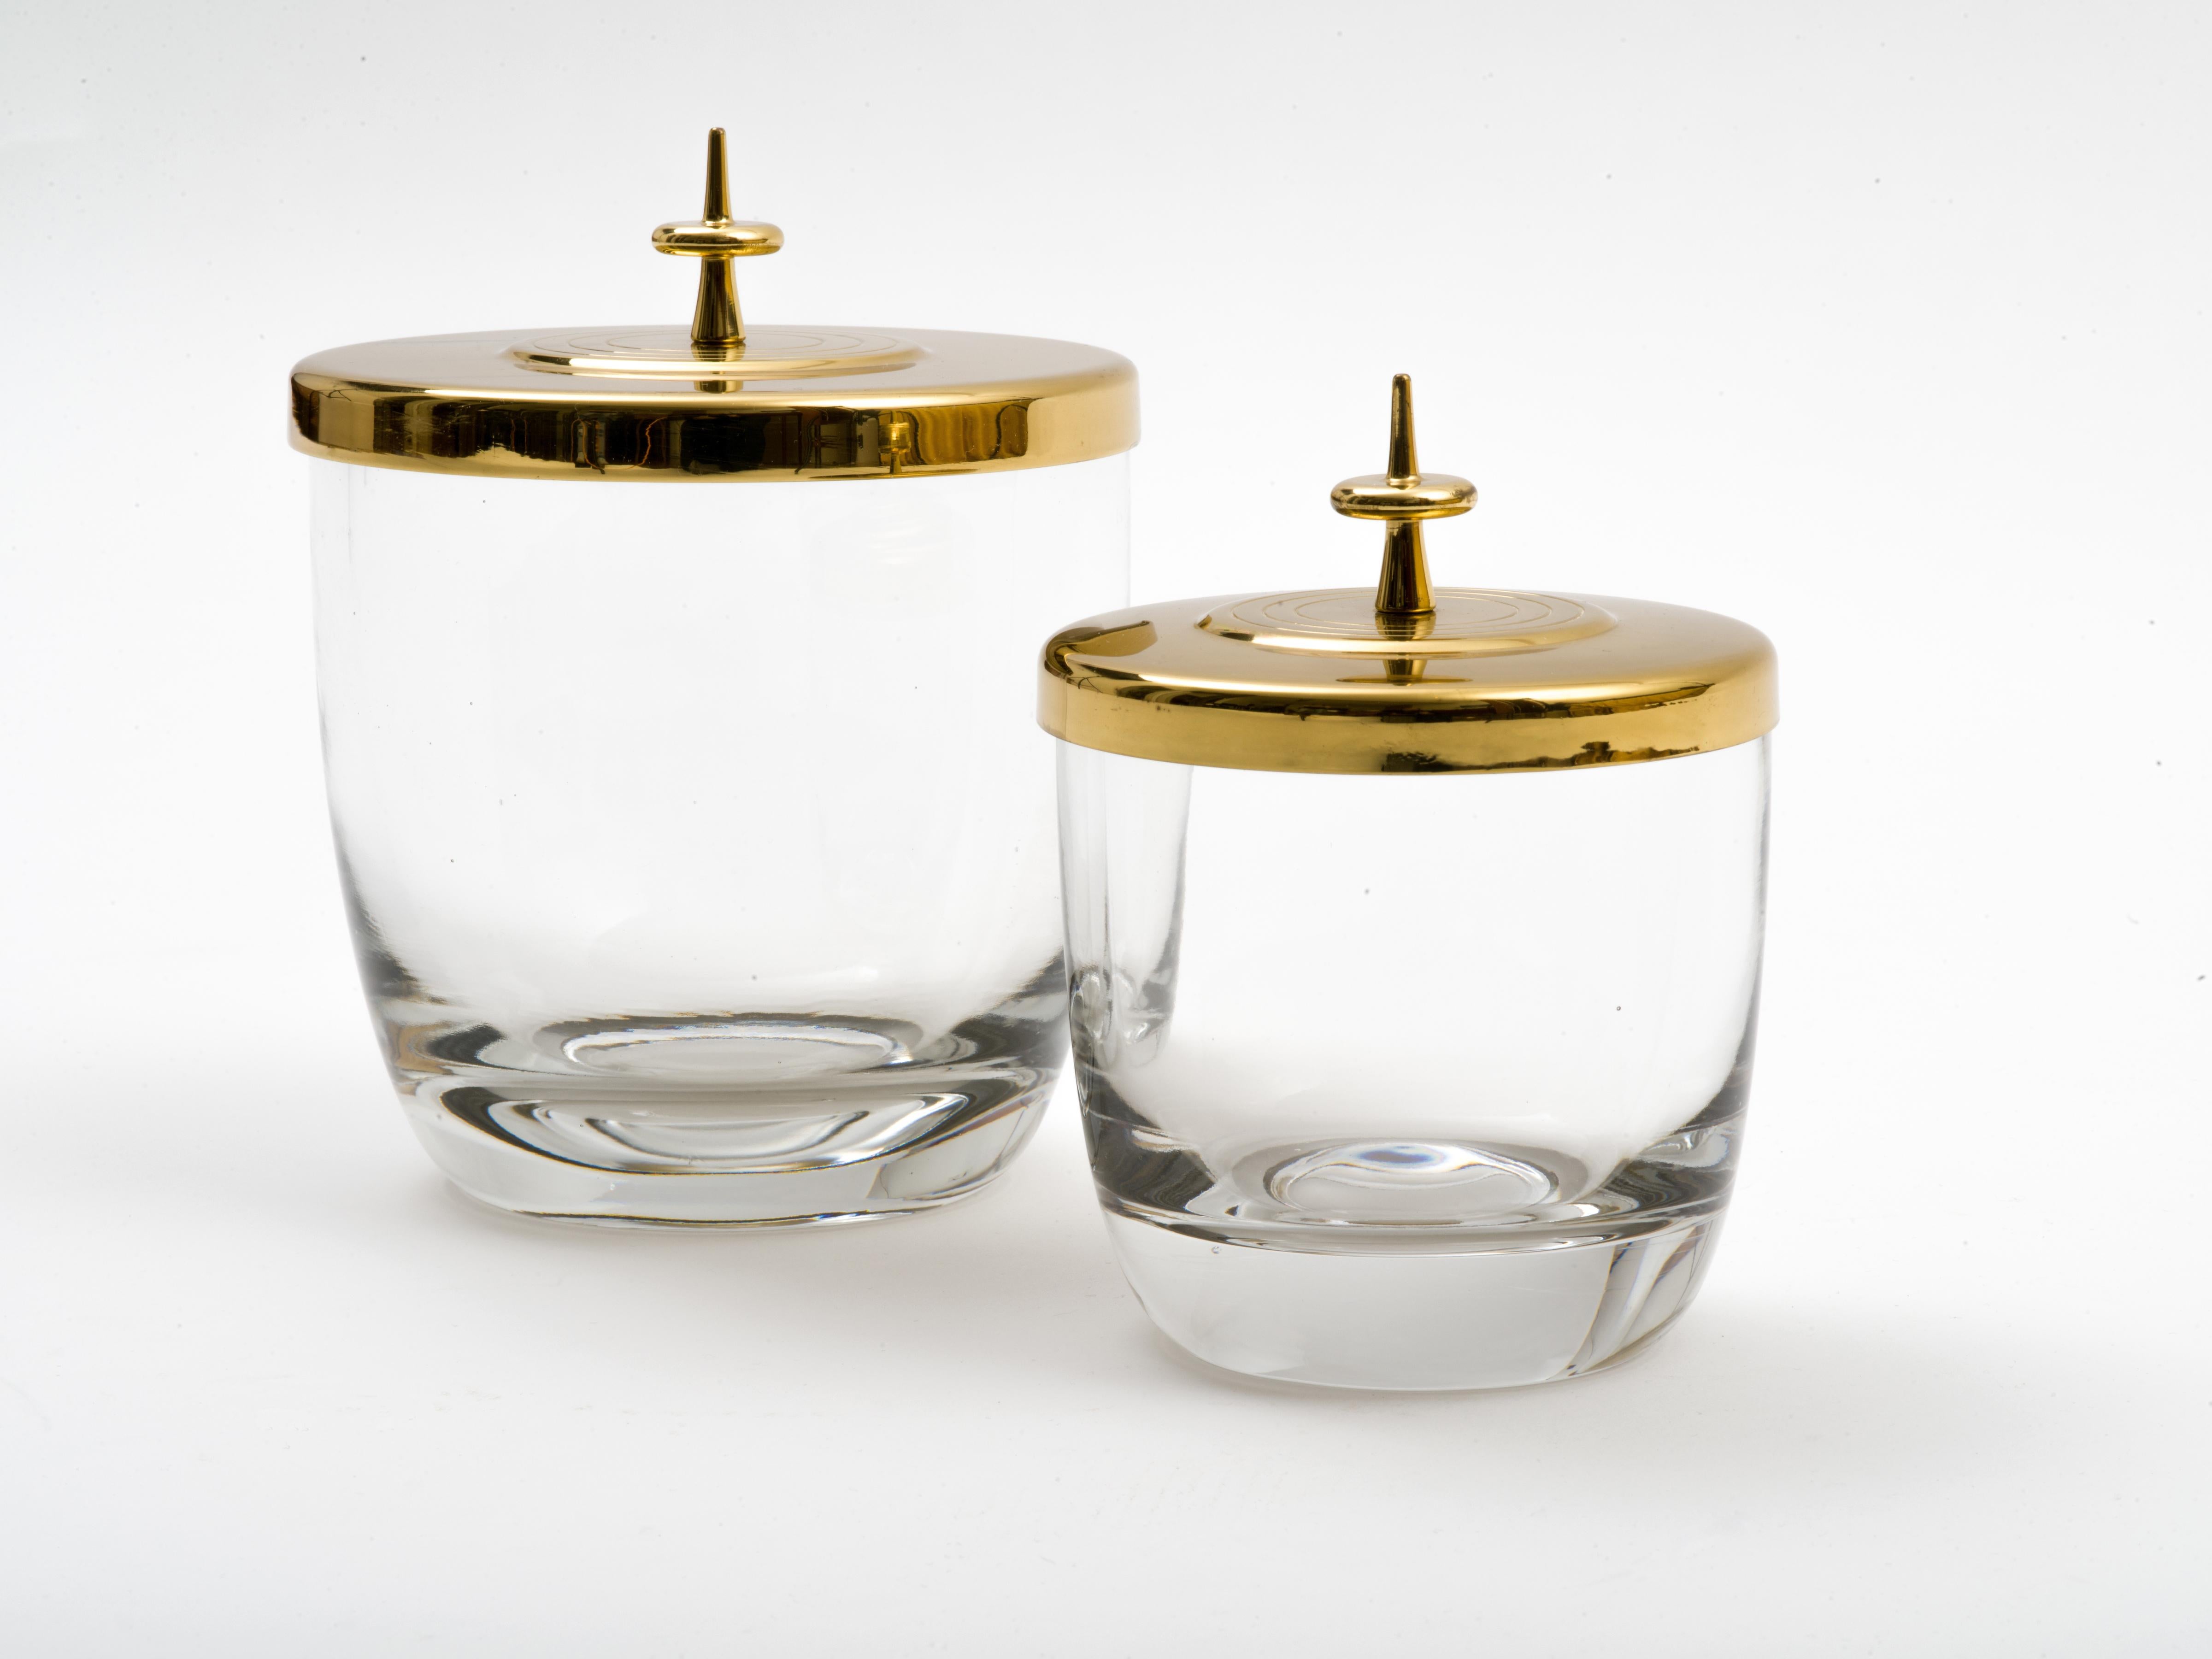 An exceptional and rare Tommi Parzinger design for Dorlyn Silversmiths. A pair of thick, mold-blown glass bowls or jars with lacquered brass lids executed in Parzinger's signature modernist style. These have substantial weight and presence and lend